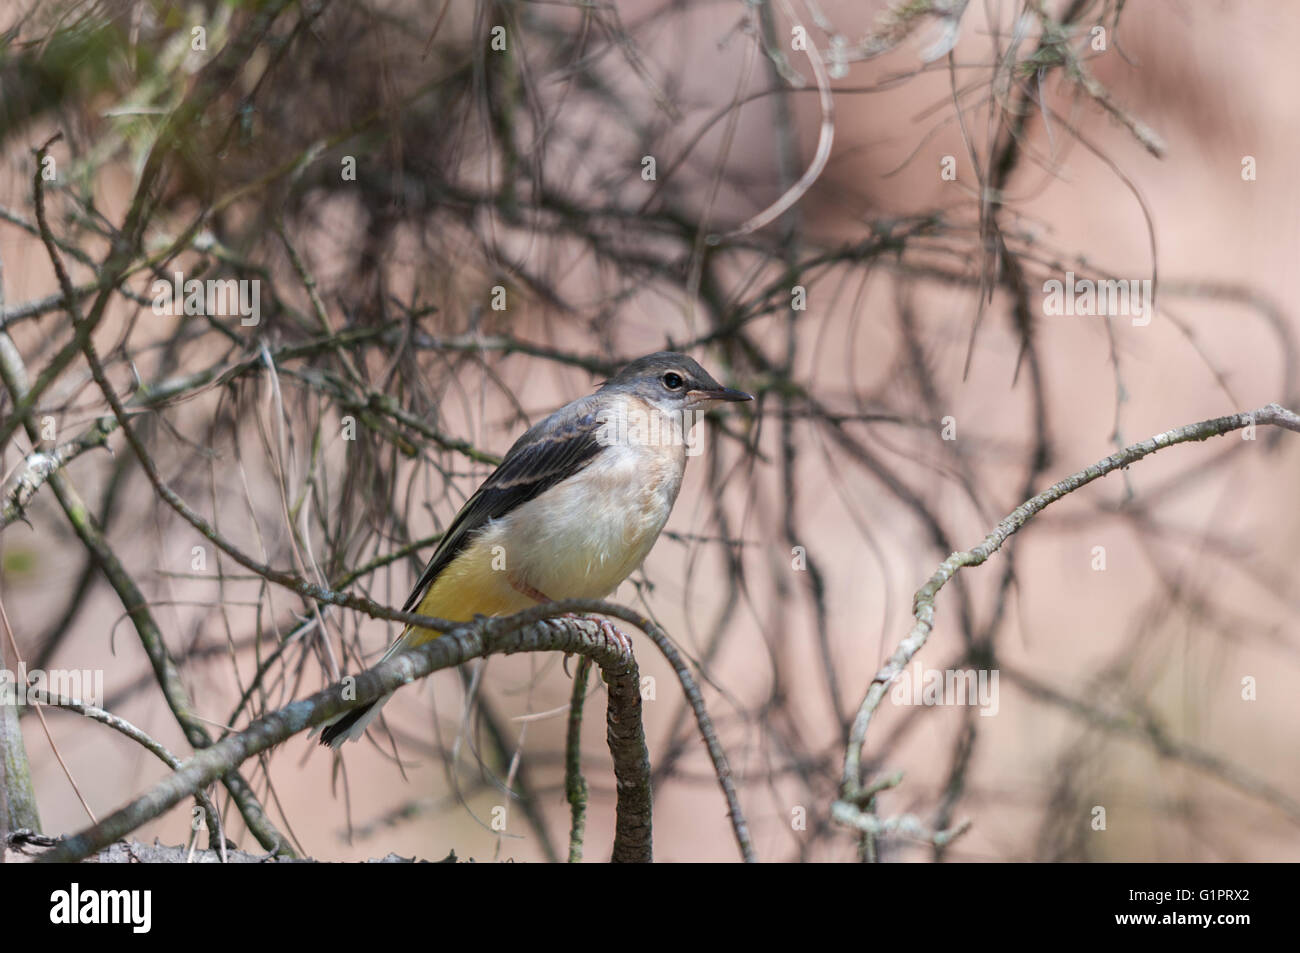 A grey wagtail (Motacilla cinerea) fledgeling waiting on a pine tree Stock Photo